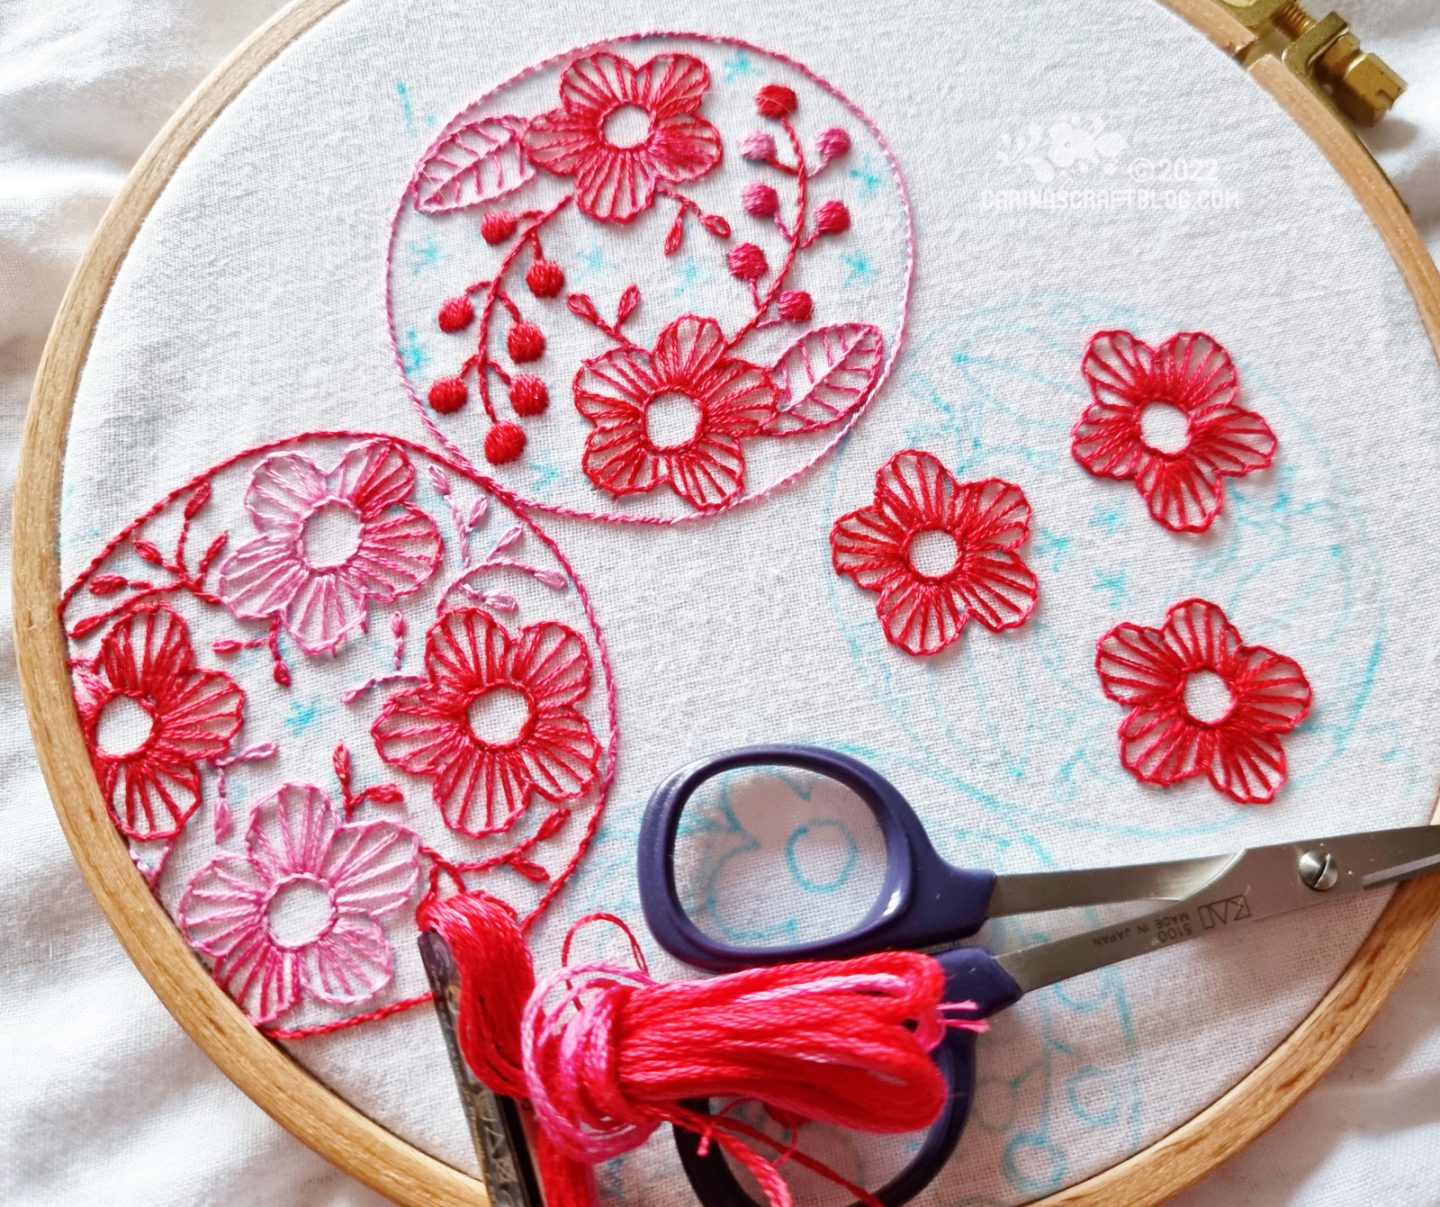 Closely cropped photo of an embroidery hoop with white fabric. On the fabric is embroidered round motifs with flowers in a variegated pink thread colour.